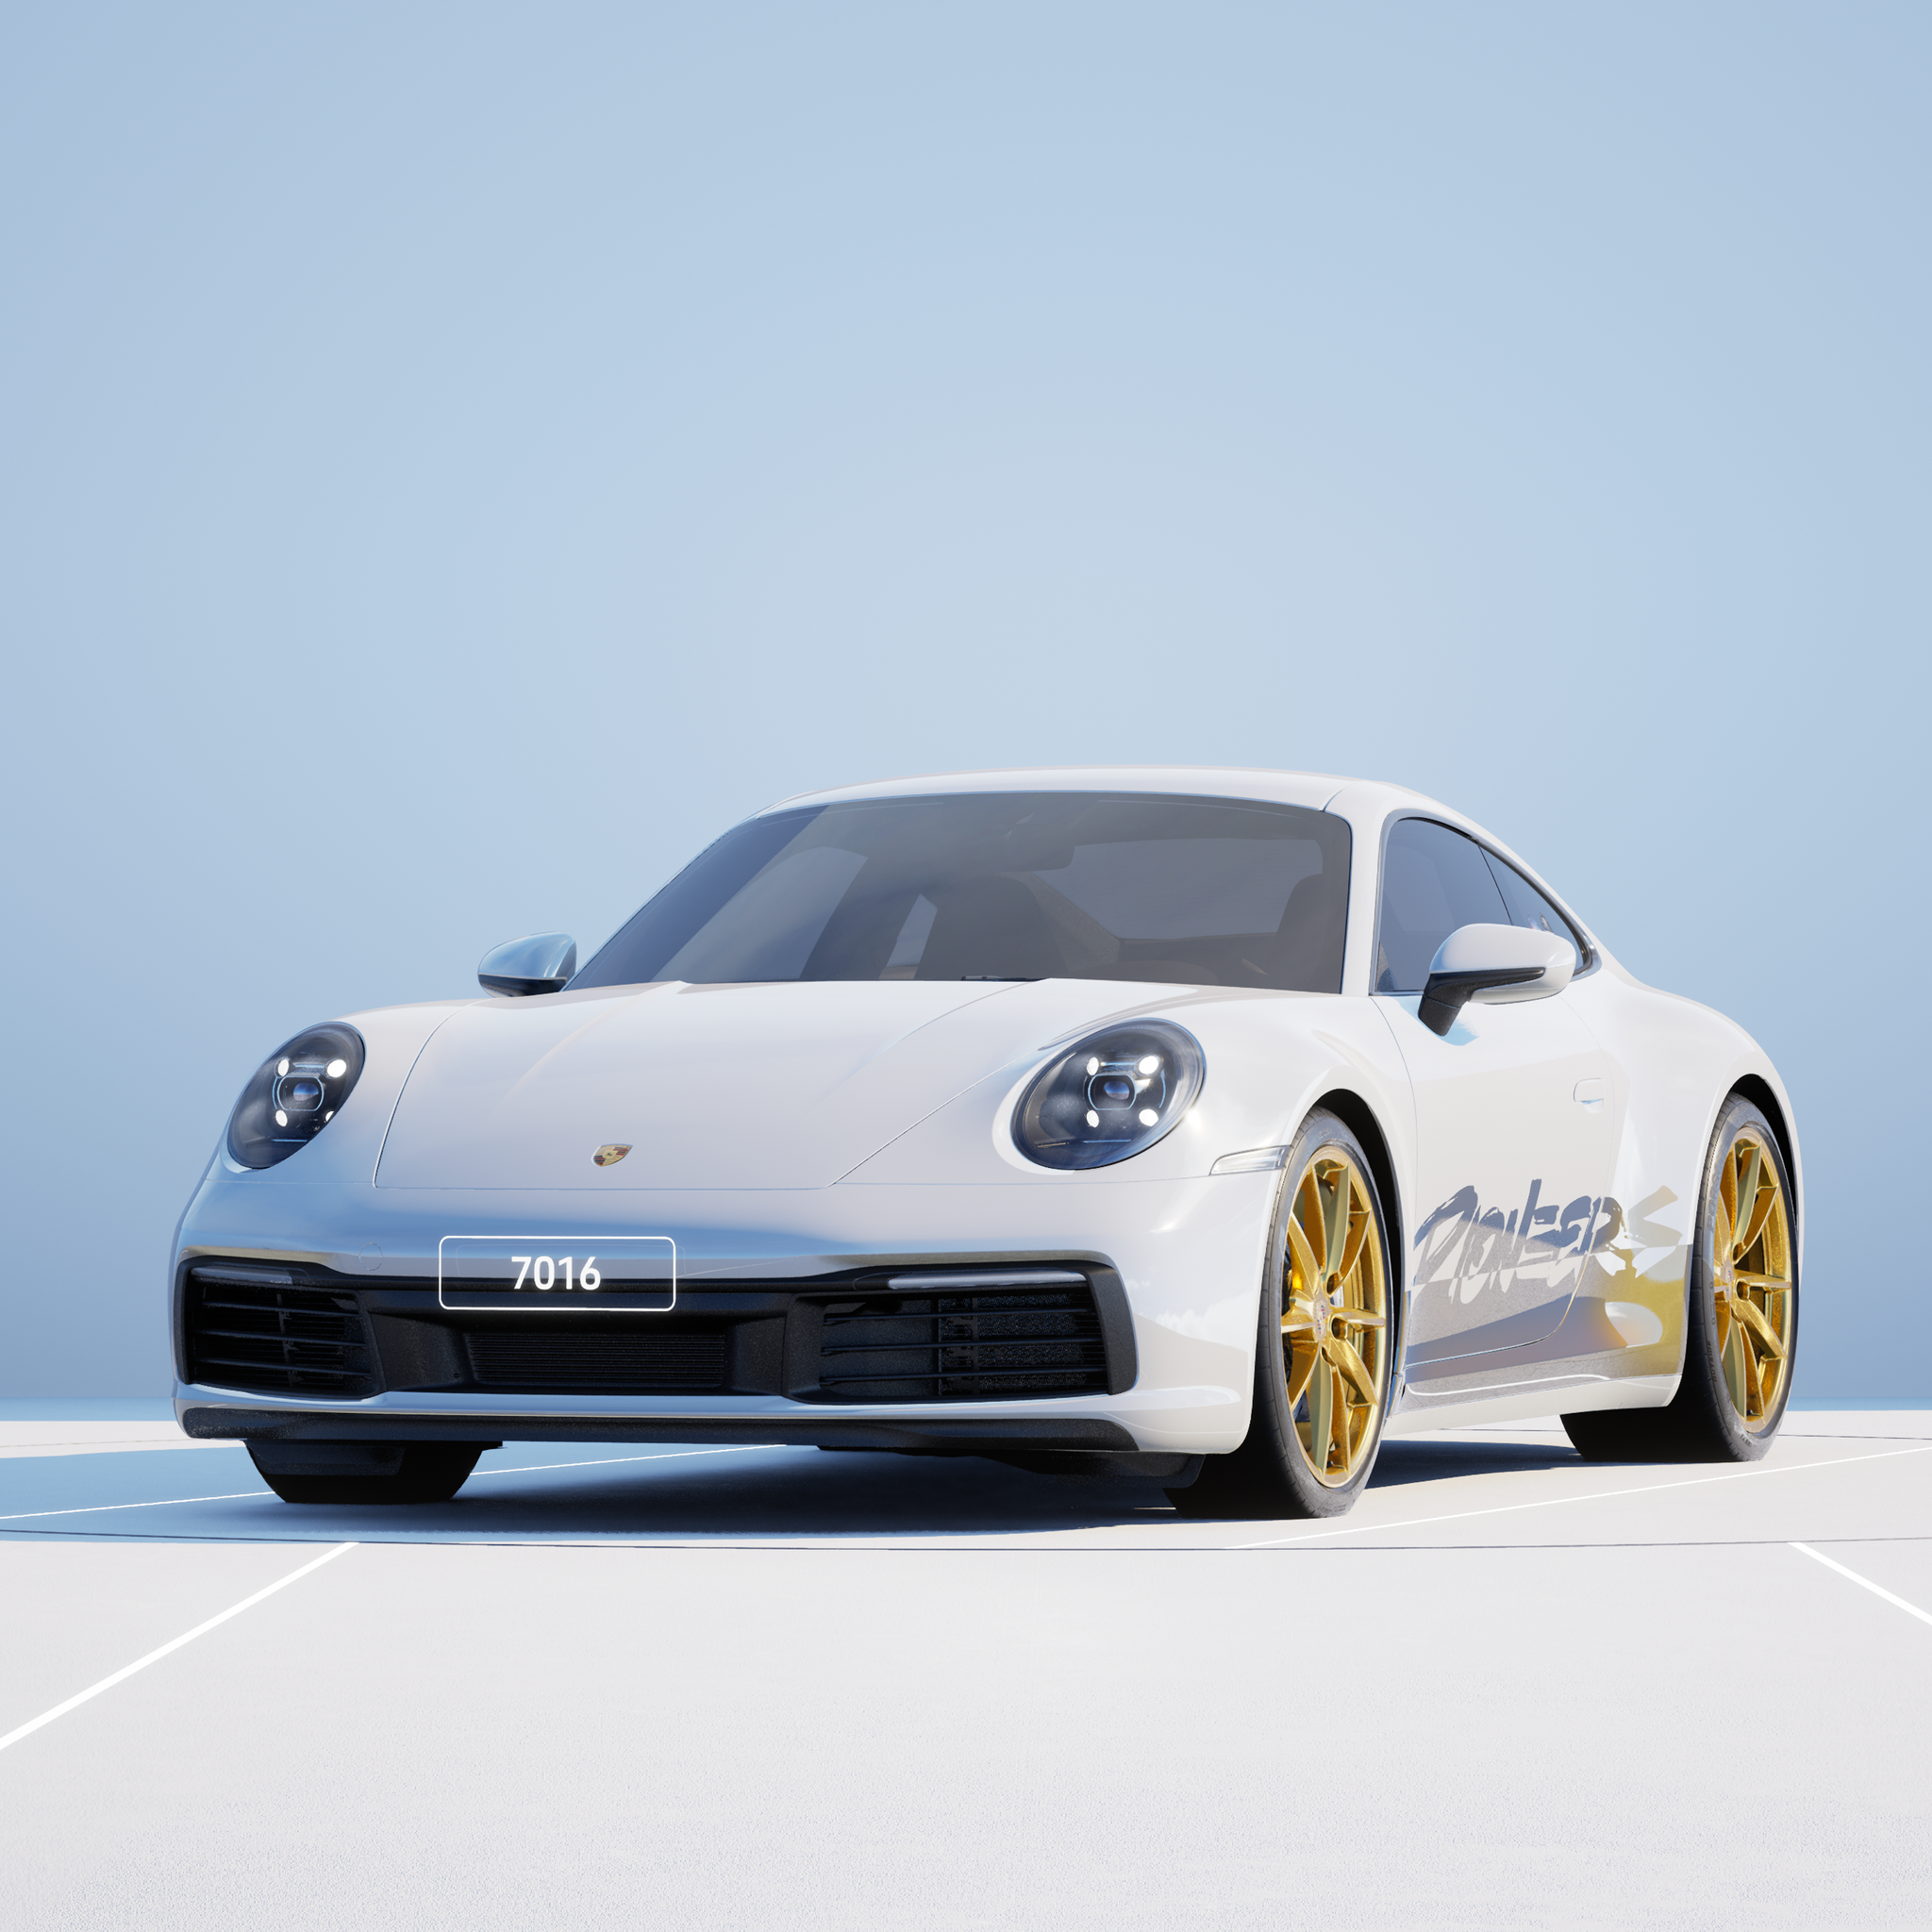 The PORSCHΞ 911 7016 image in phase